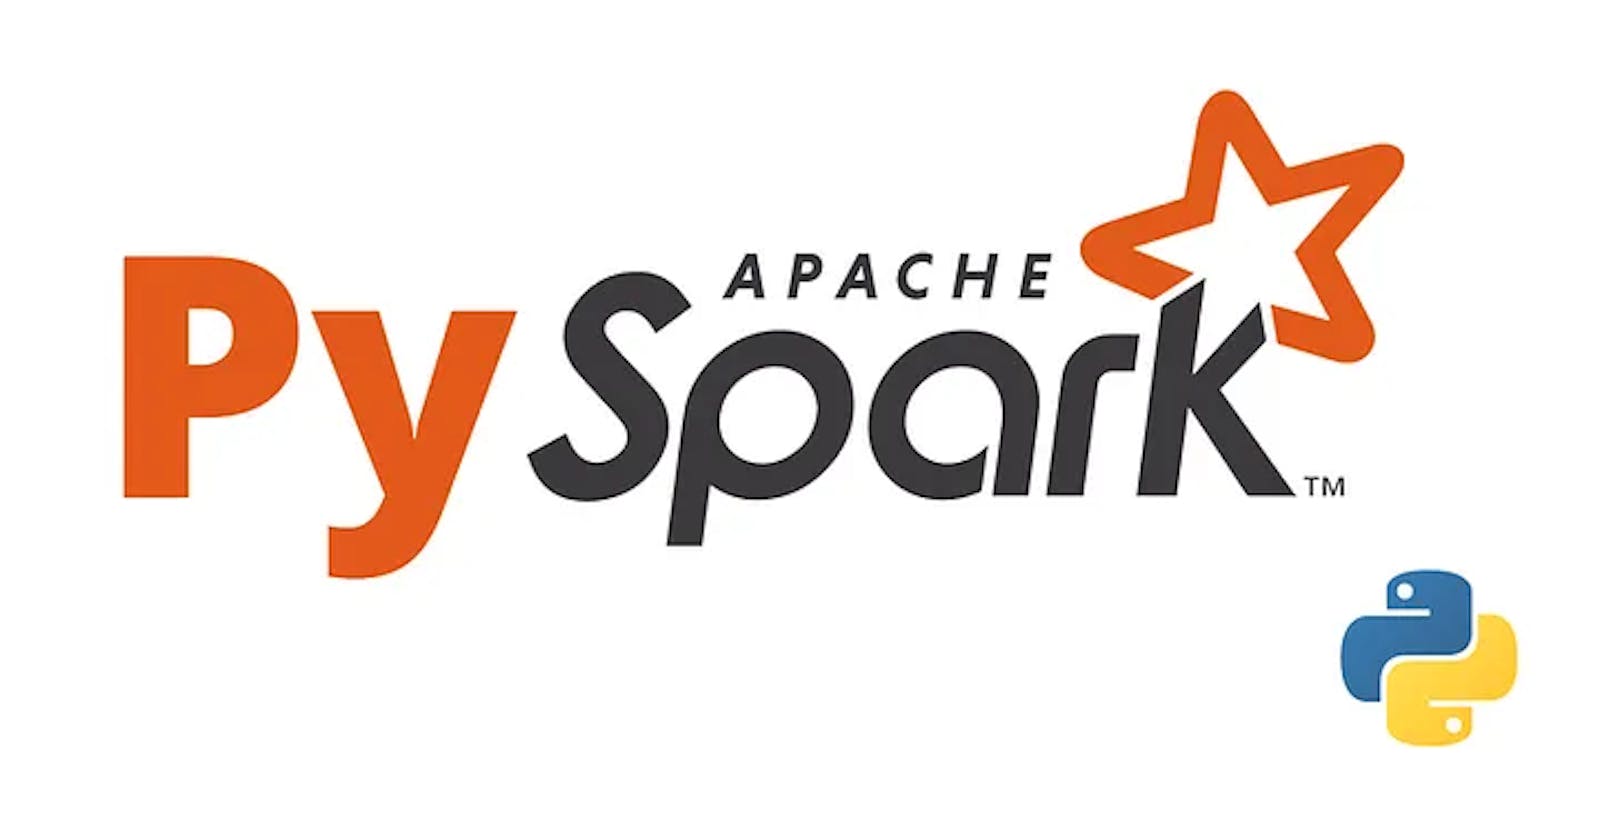 Loading, Transforming, and Saving GitHub Archive Data with PySpark